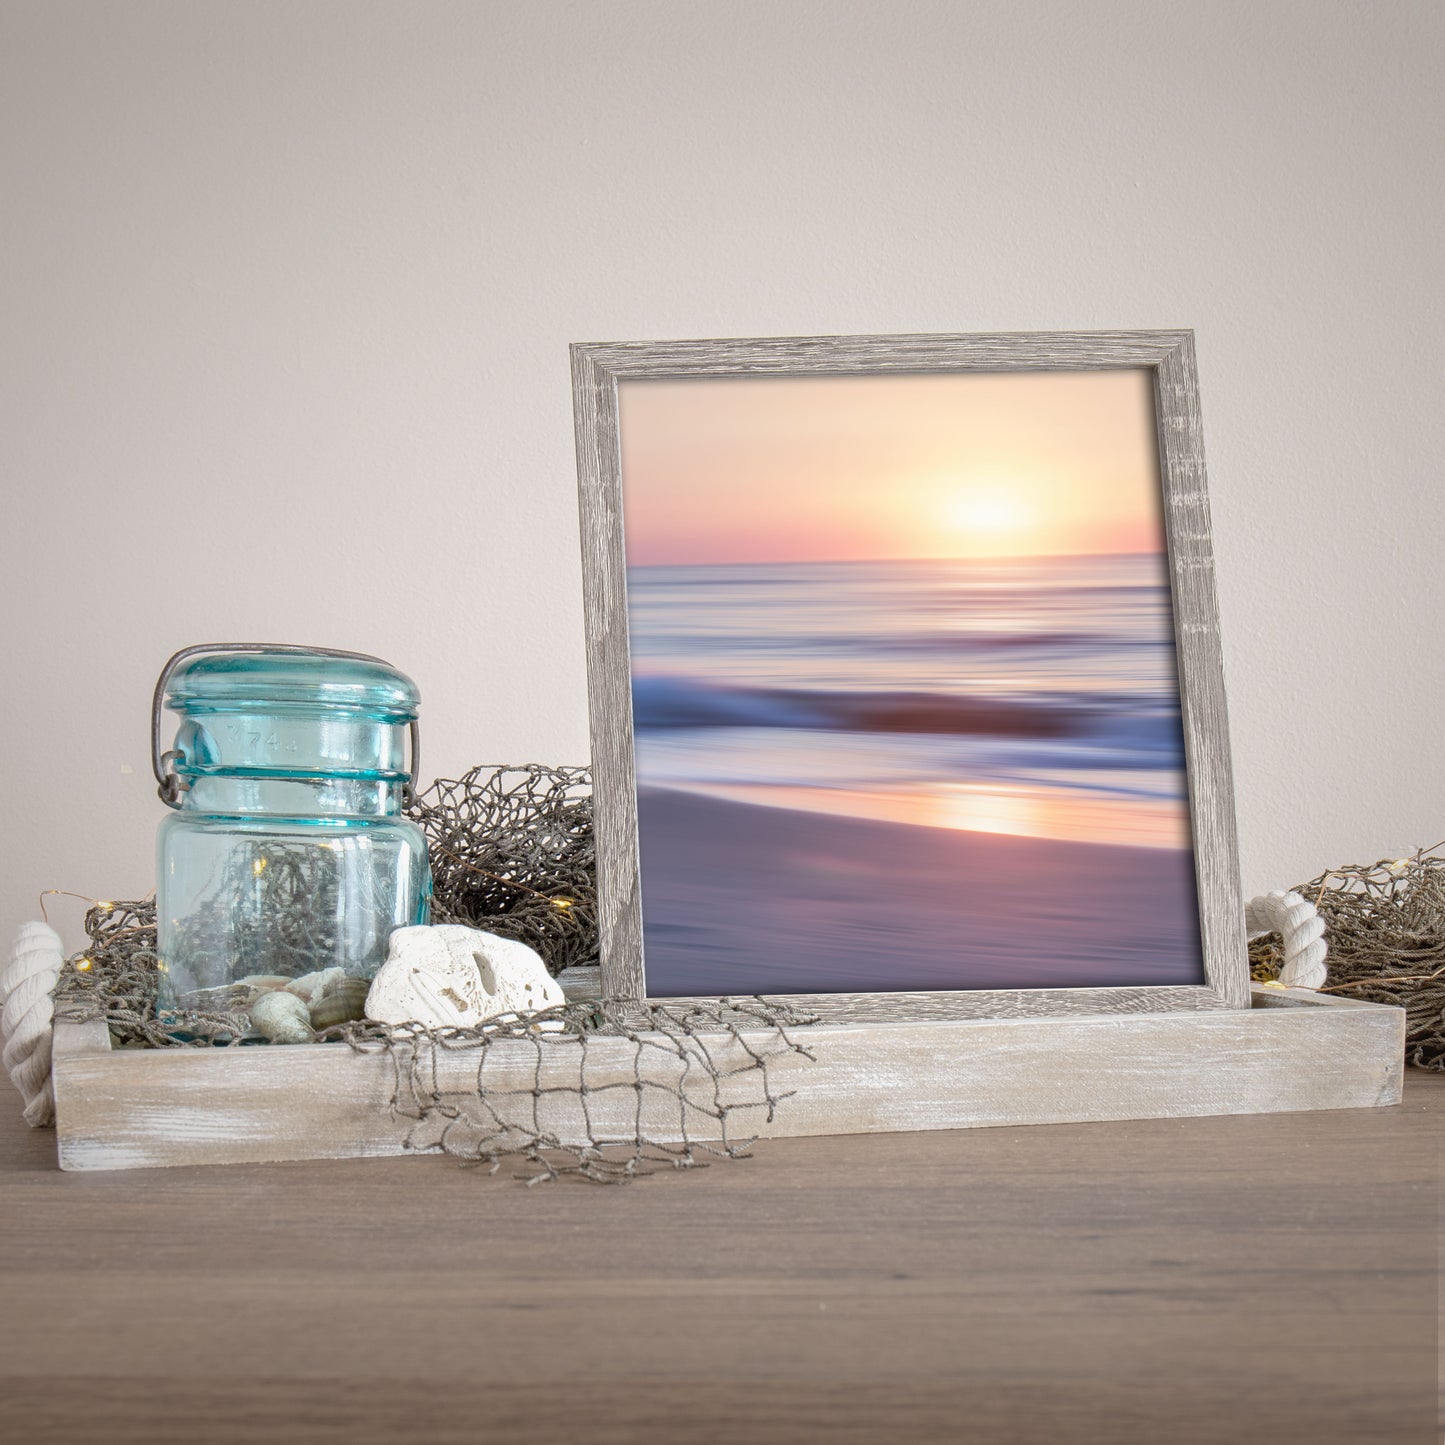 Muted color print of peaceful ocean view at dawn for a calming ambiance.